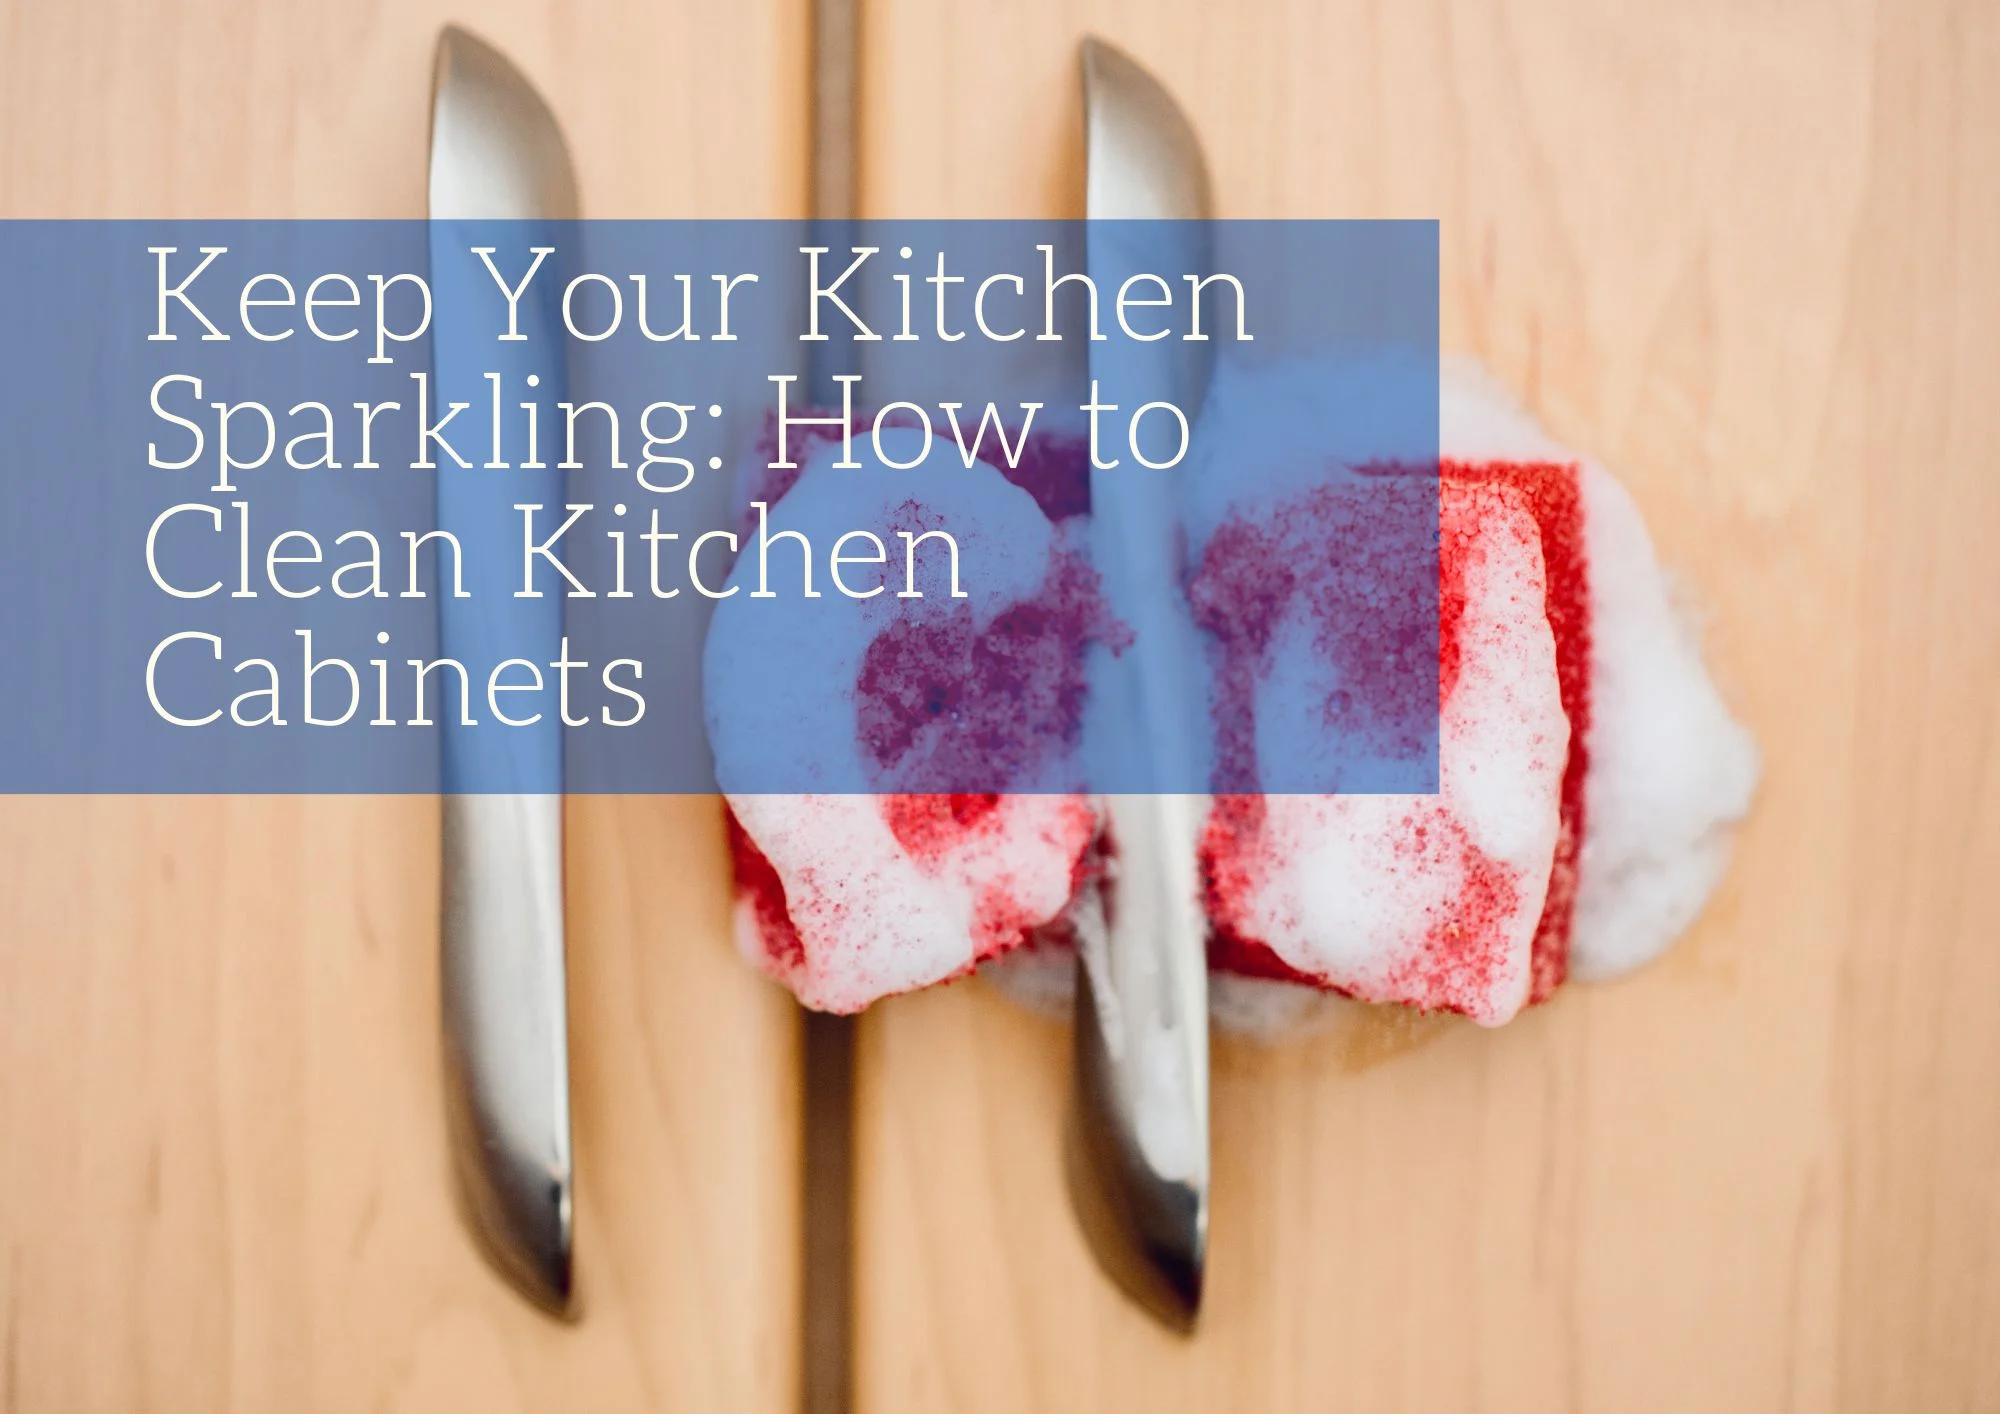 Keep Your Kitchen Sparkling How to Clean Kitchen Cabinets